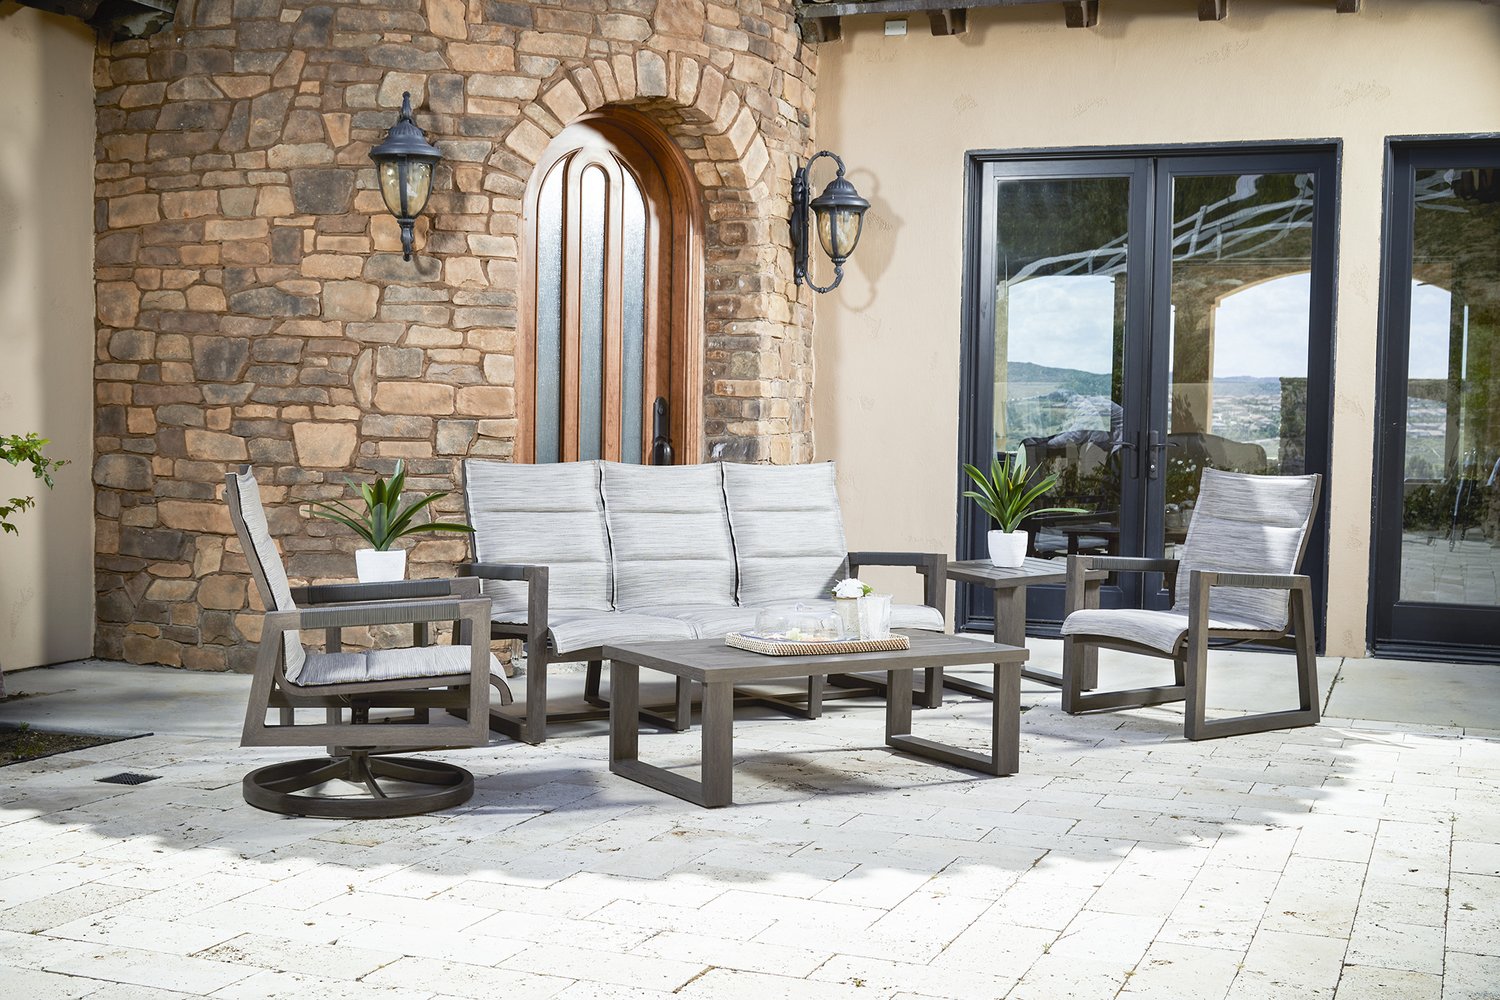 Shop Local Spokane Valley, WA for the best outdoor patio sofa from Patio Renaissance available at Jacobs Custom Living in Spokane Valley, WA 